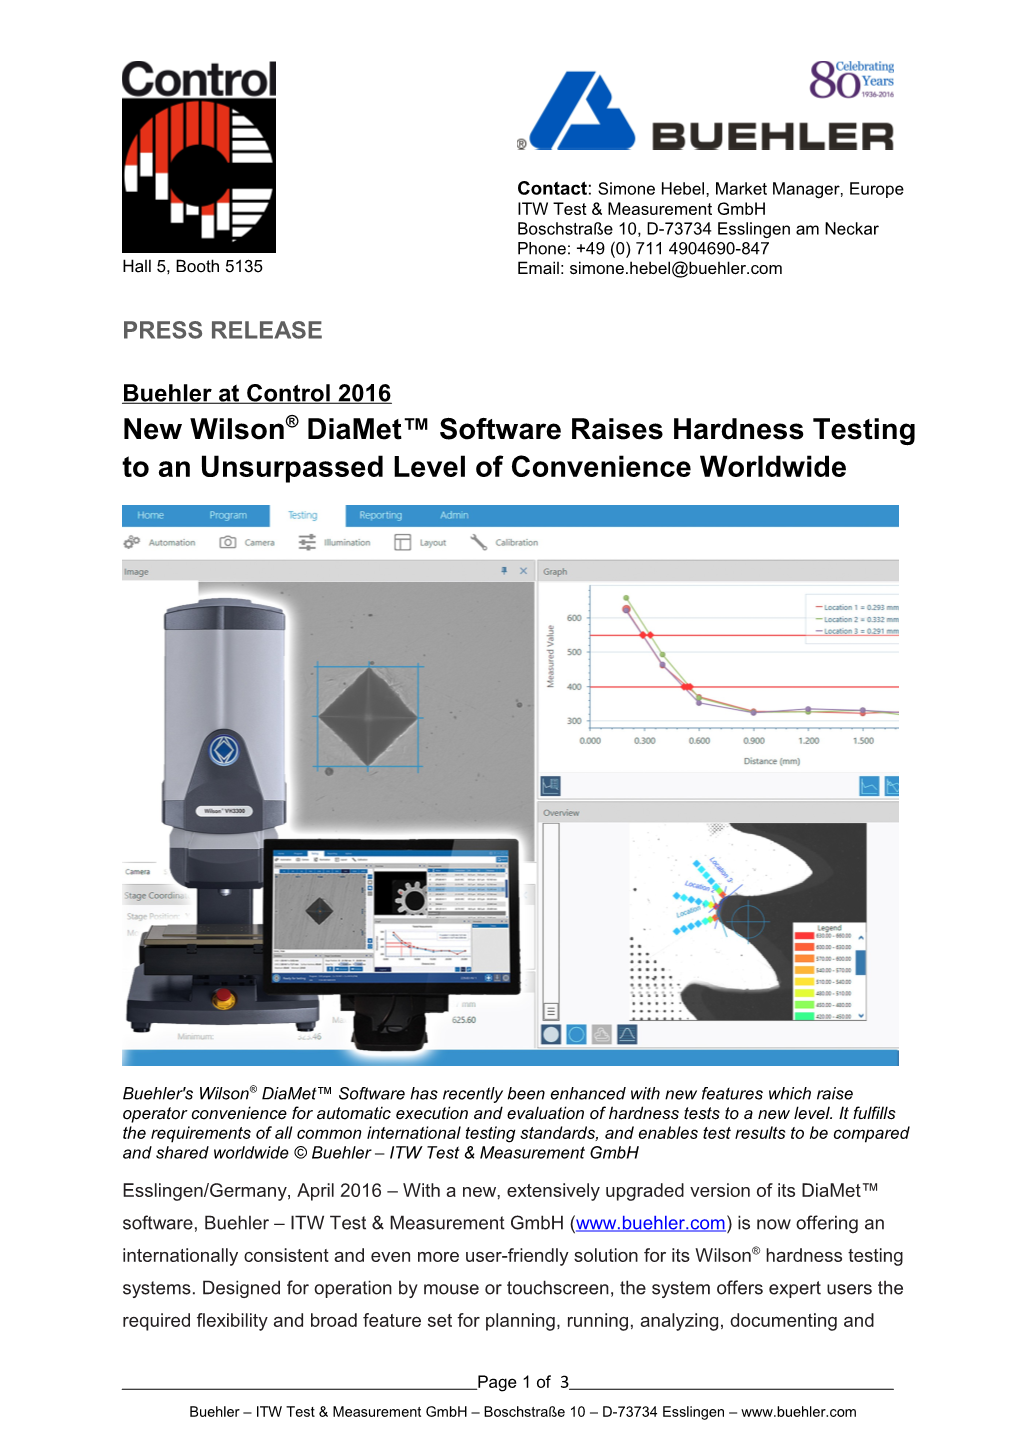 New Wilson Diamet Software Raises Hardness Testing to an Unsurpassed Level of Convenience